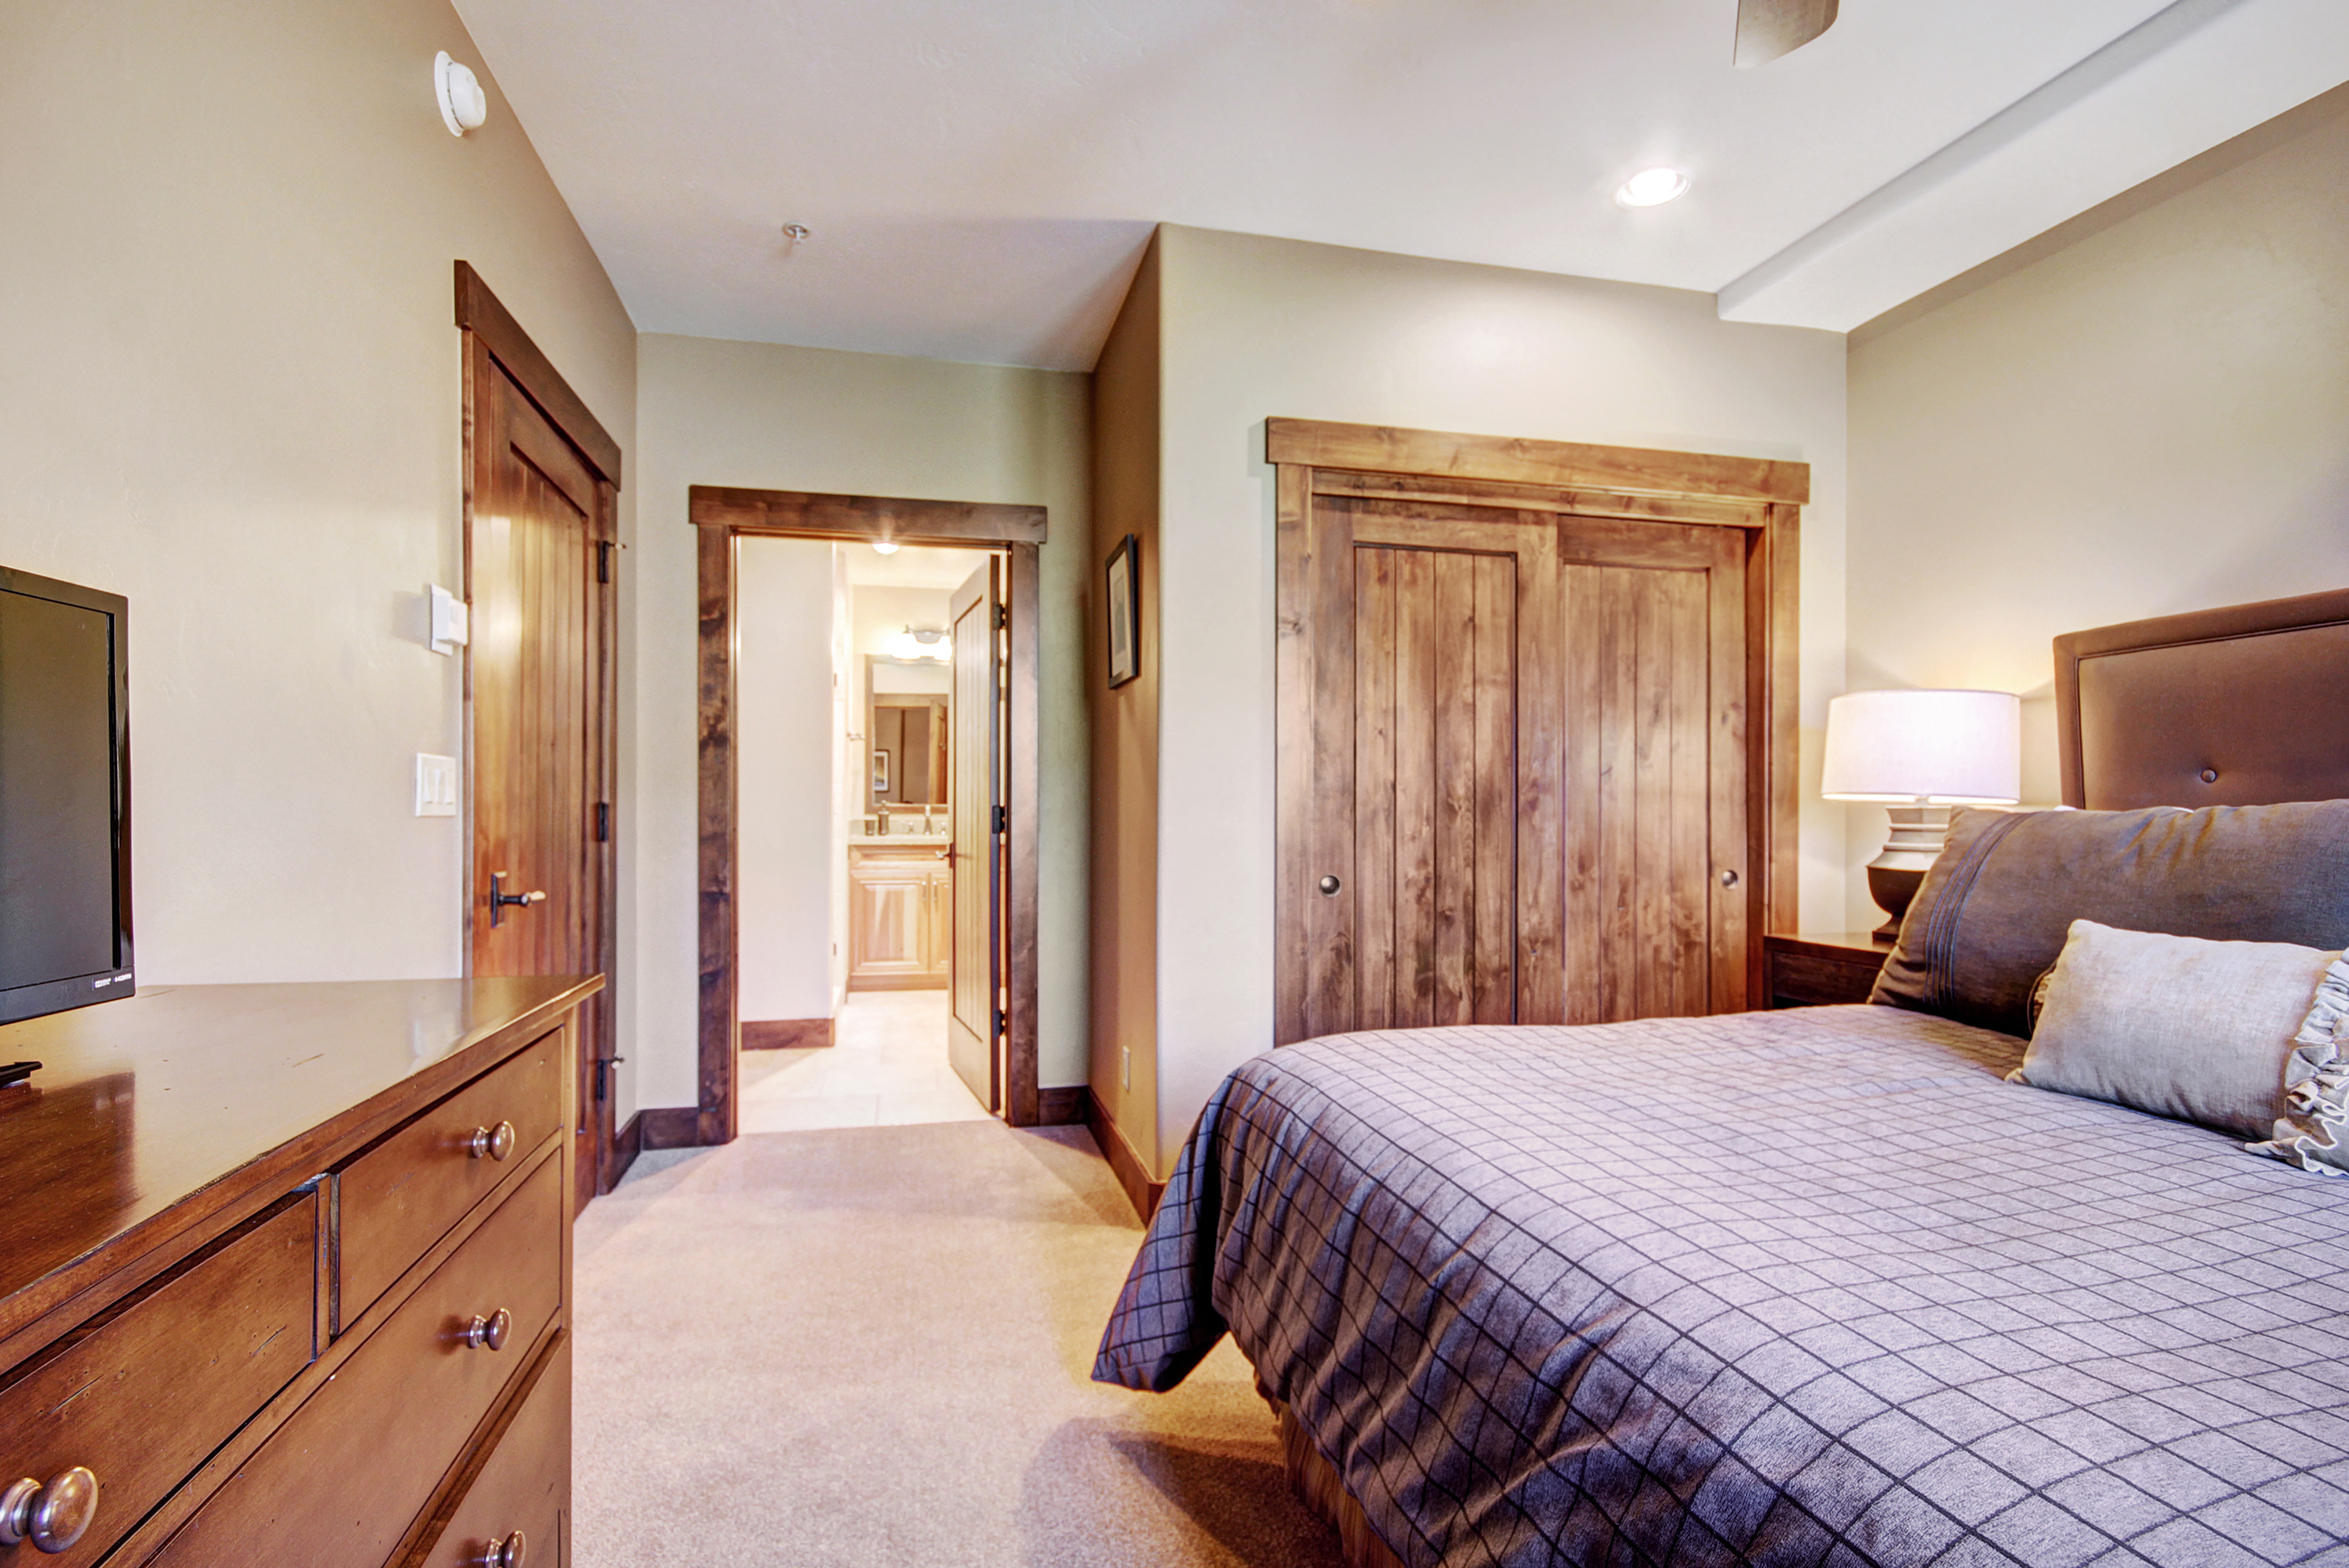 Relax in this spacious and cozy master bedroom after a long day/night out on the town.